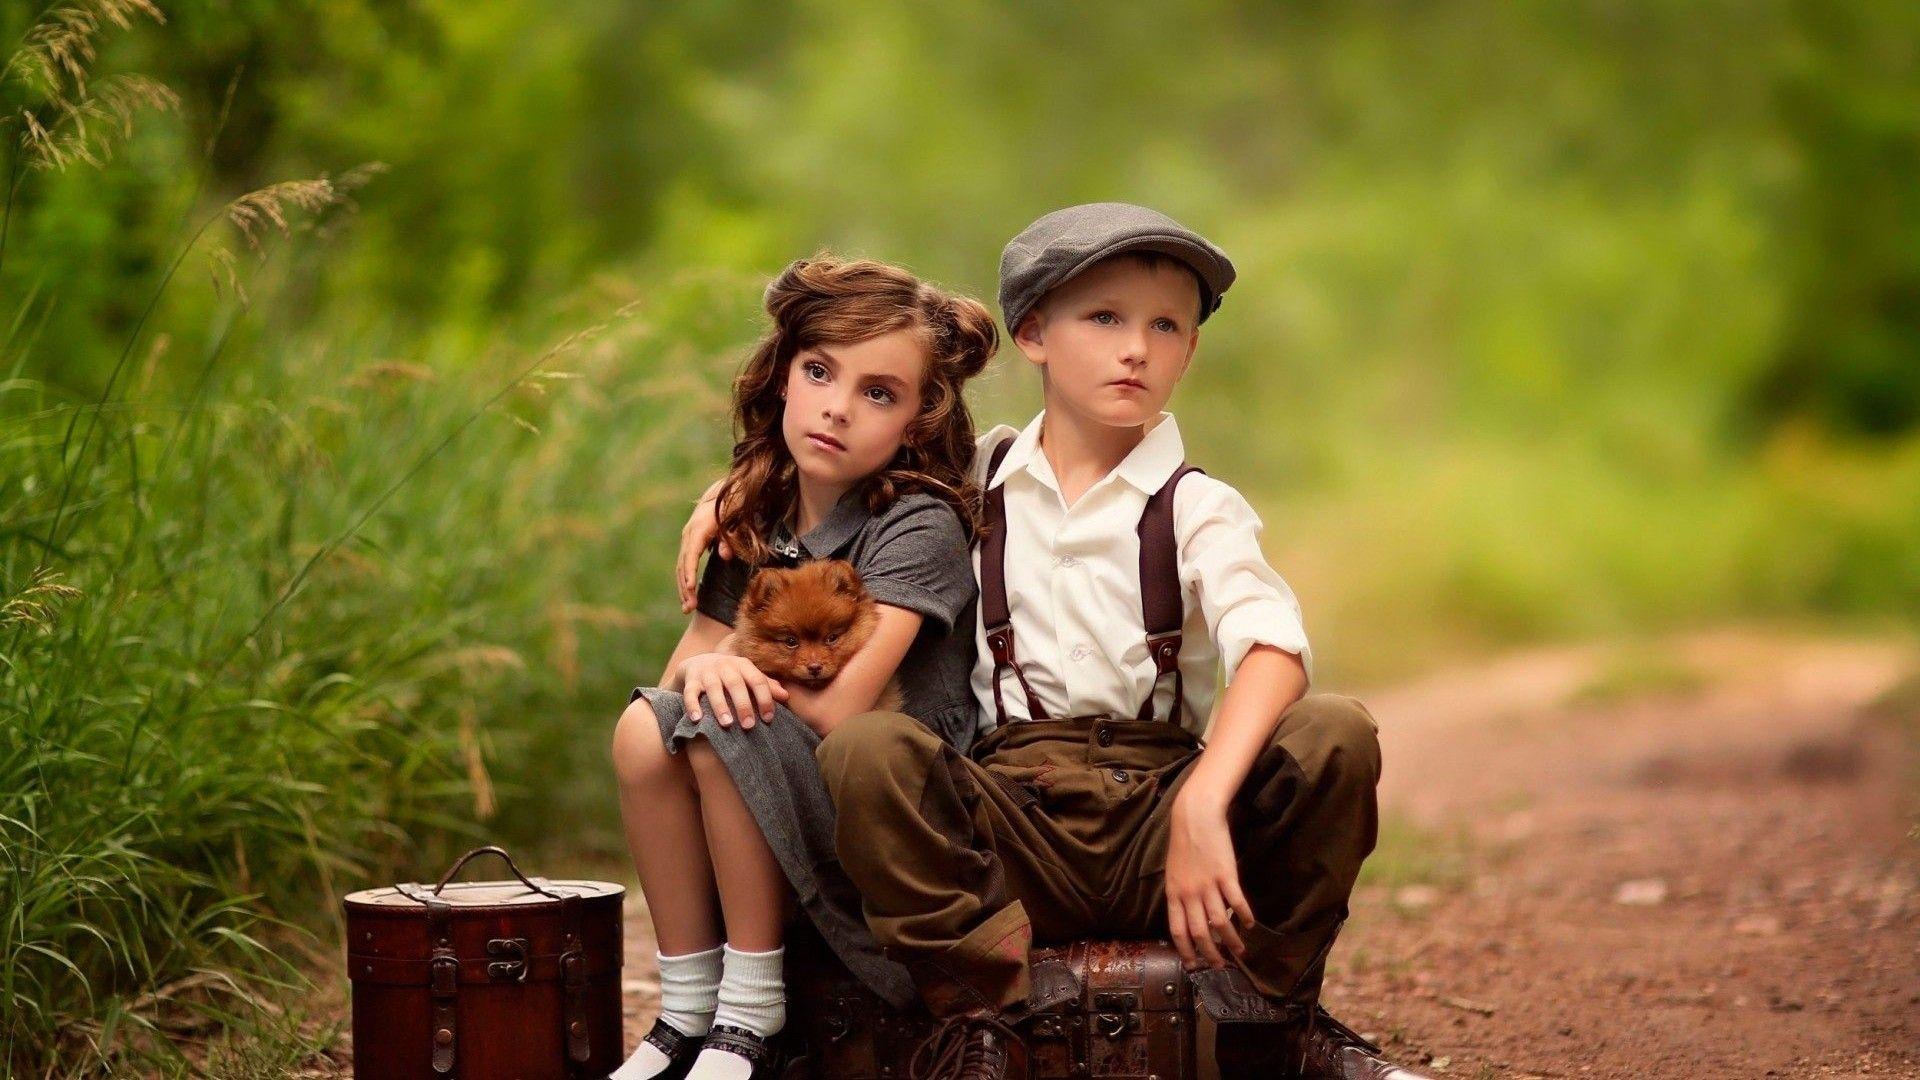 Download Boy And Girl Cute Wallpaper Gallery